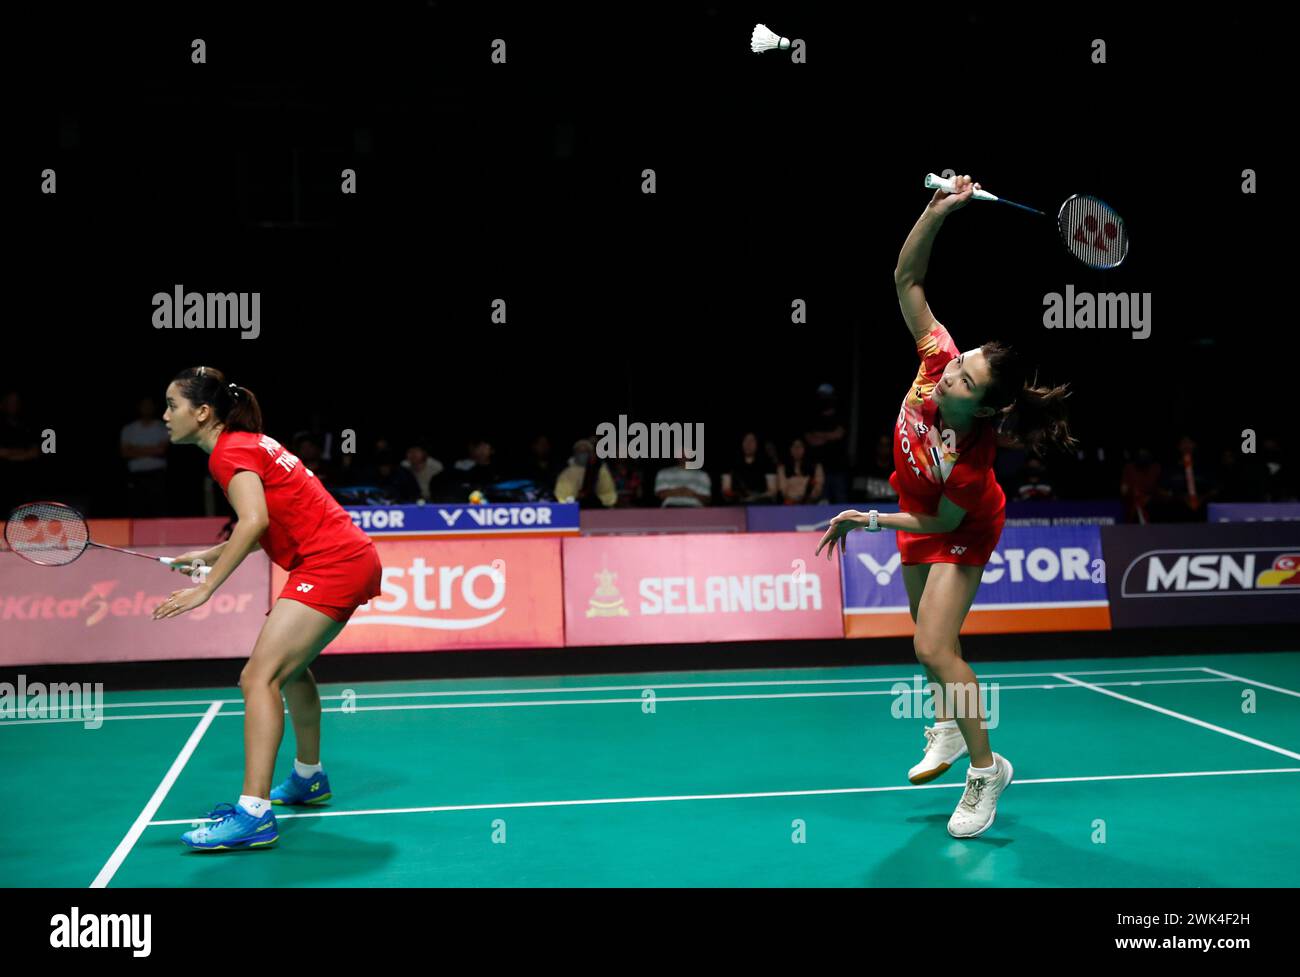 Kuala Lumpur, Malaysia. 18th Feb, 2024. Jongkolphan Kititharakul (R) and Rawinda Projongjai of Thailand in action against Gayatri Gopichand Pullela and Treesa Jolly of India (not pictured) during the Women's Doubles final match at the Badminton Asia Team Championships 2024 at Setia City Convention Centre in Shah Alam. Gayatri Gopichand Pullela and Treesa Jolly won with scores; 21/18/21 : 16/21/16. (Photo by Wong Fok Loy/SOPA Images/Sipa USA) Credit: Sipa USA/Alamy Live News Stock Photo